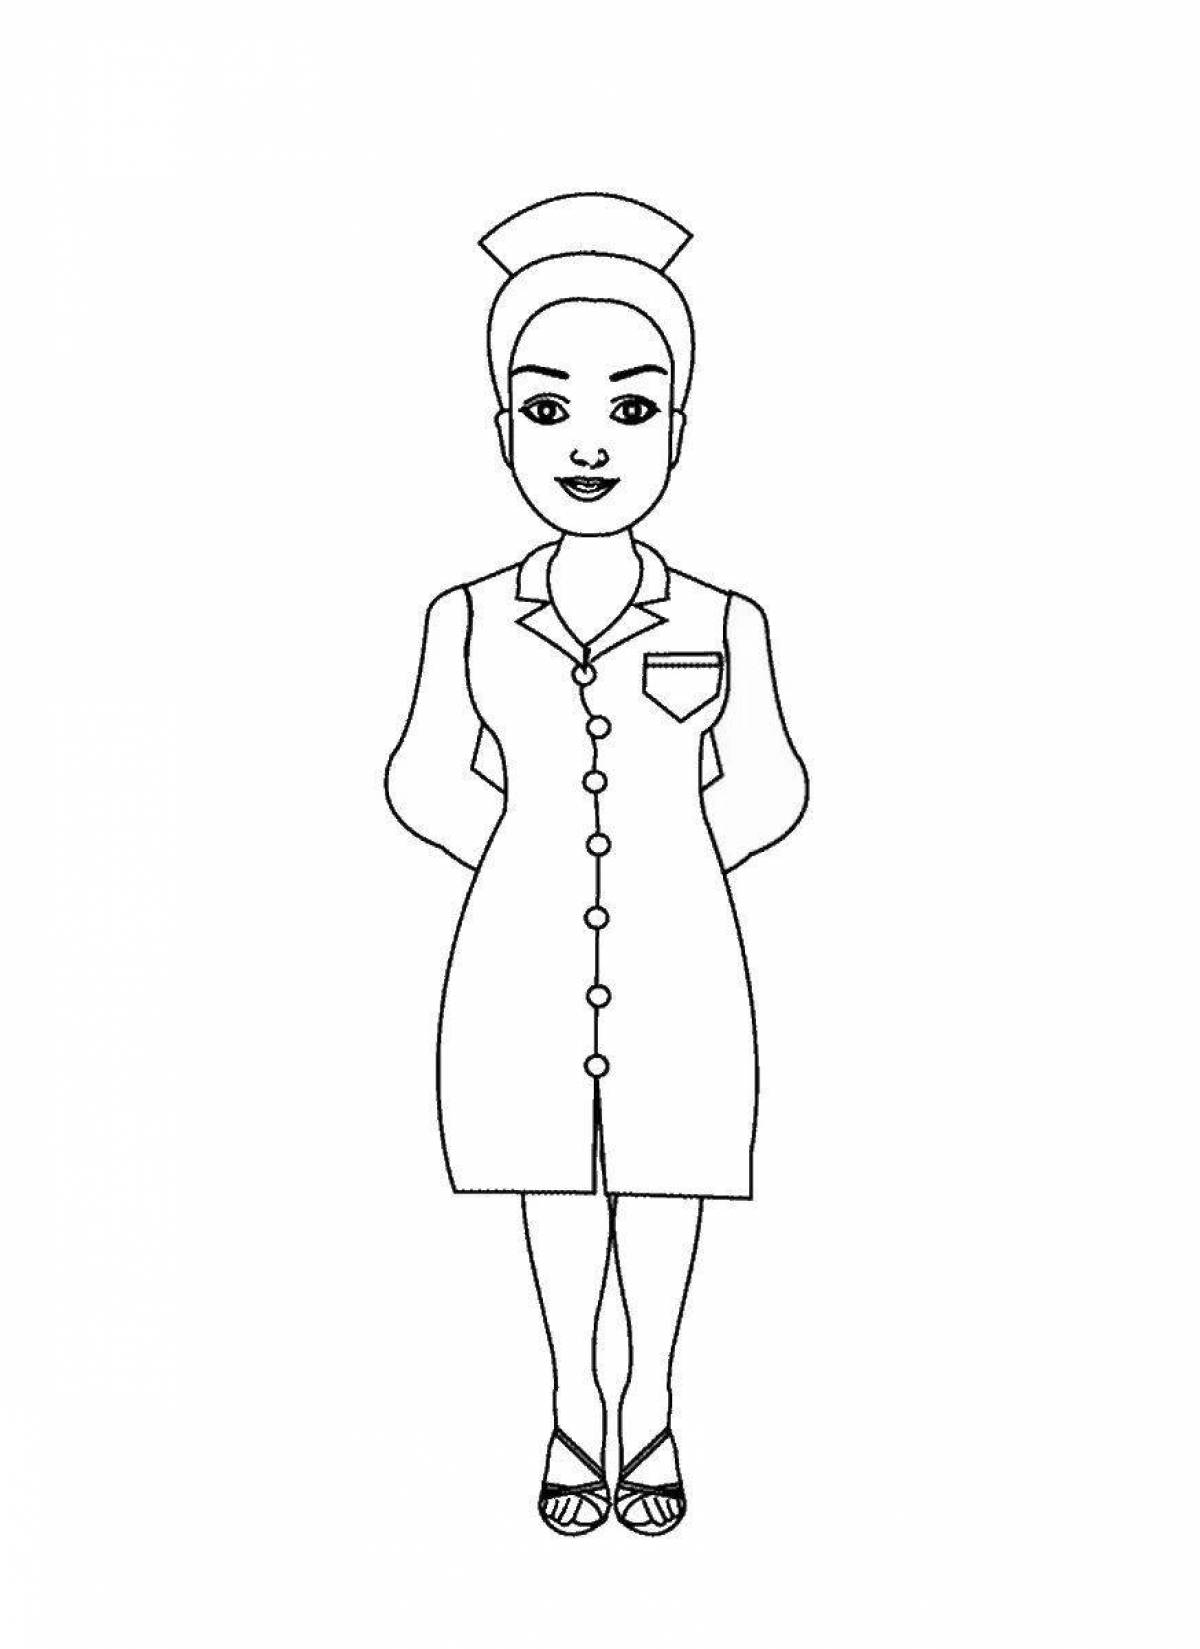 Animated nurse coloring book for kids